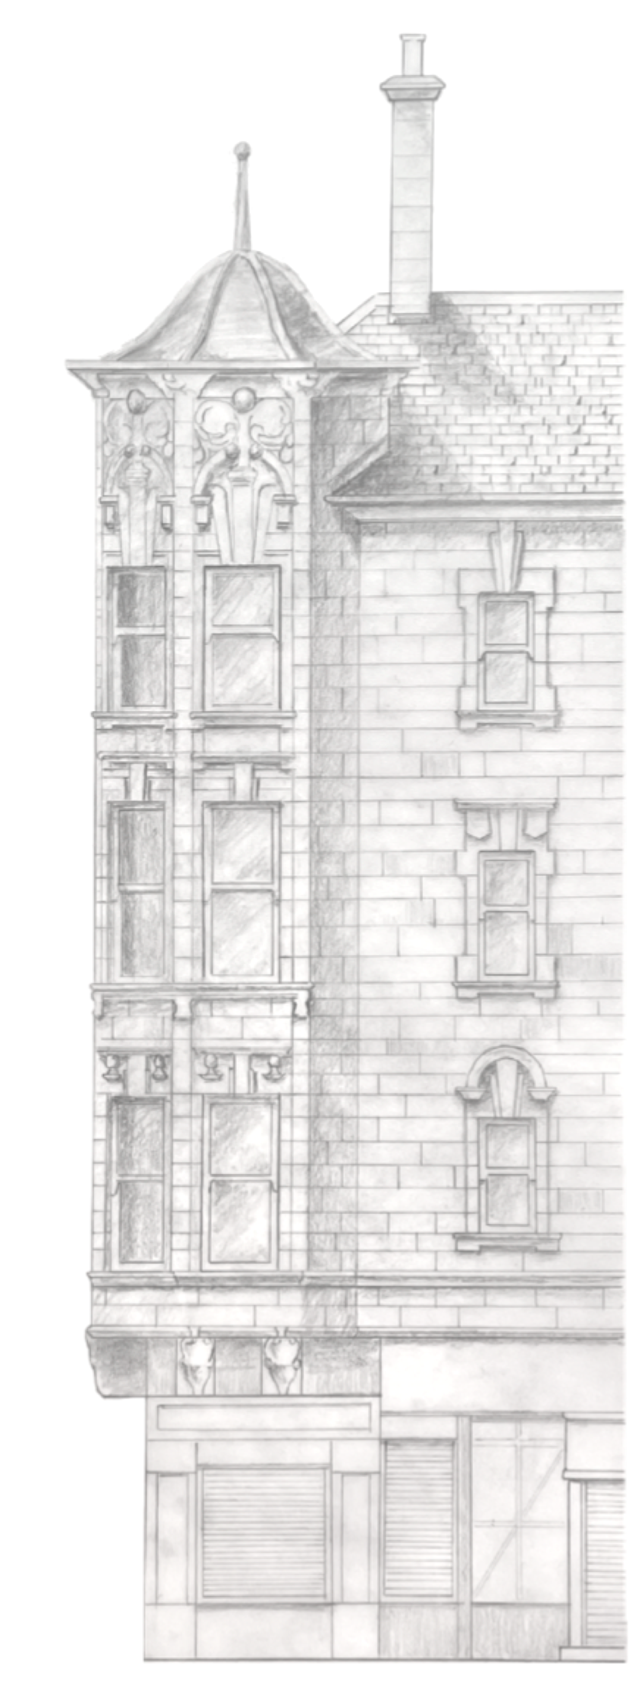 1:50 pencil drawing study of the adjacent building in Norfolk Street.  Architect: James Miller